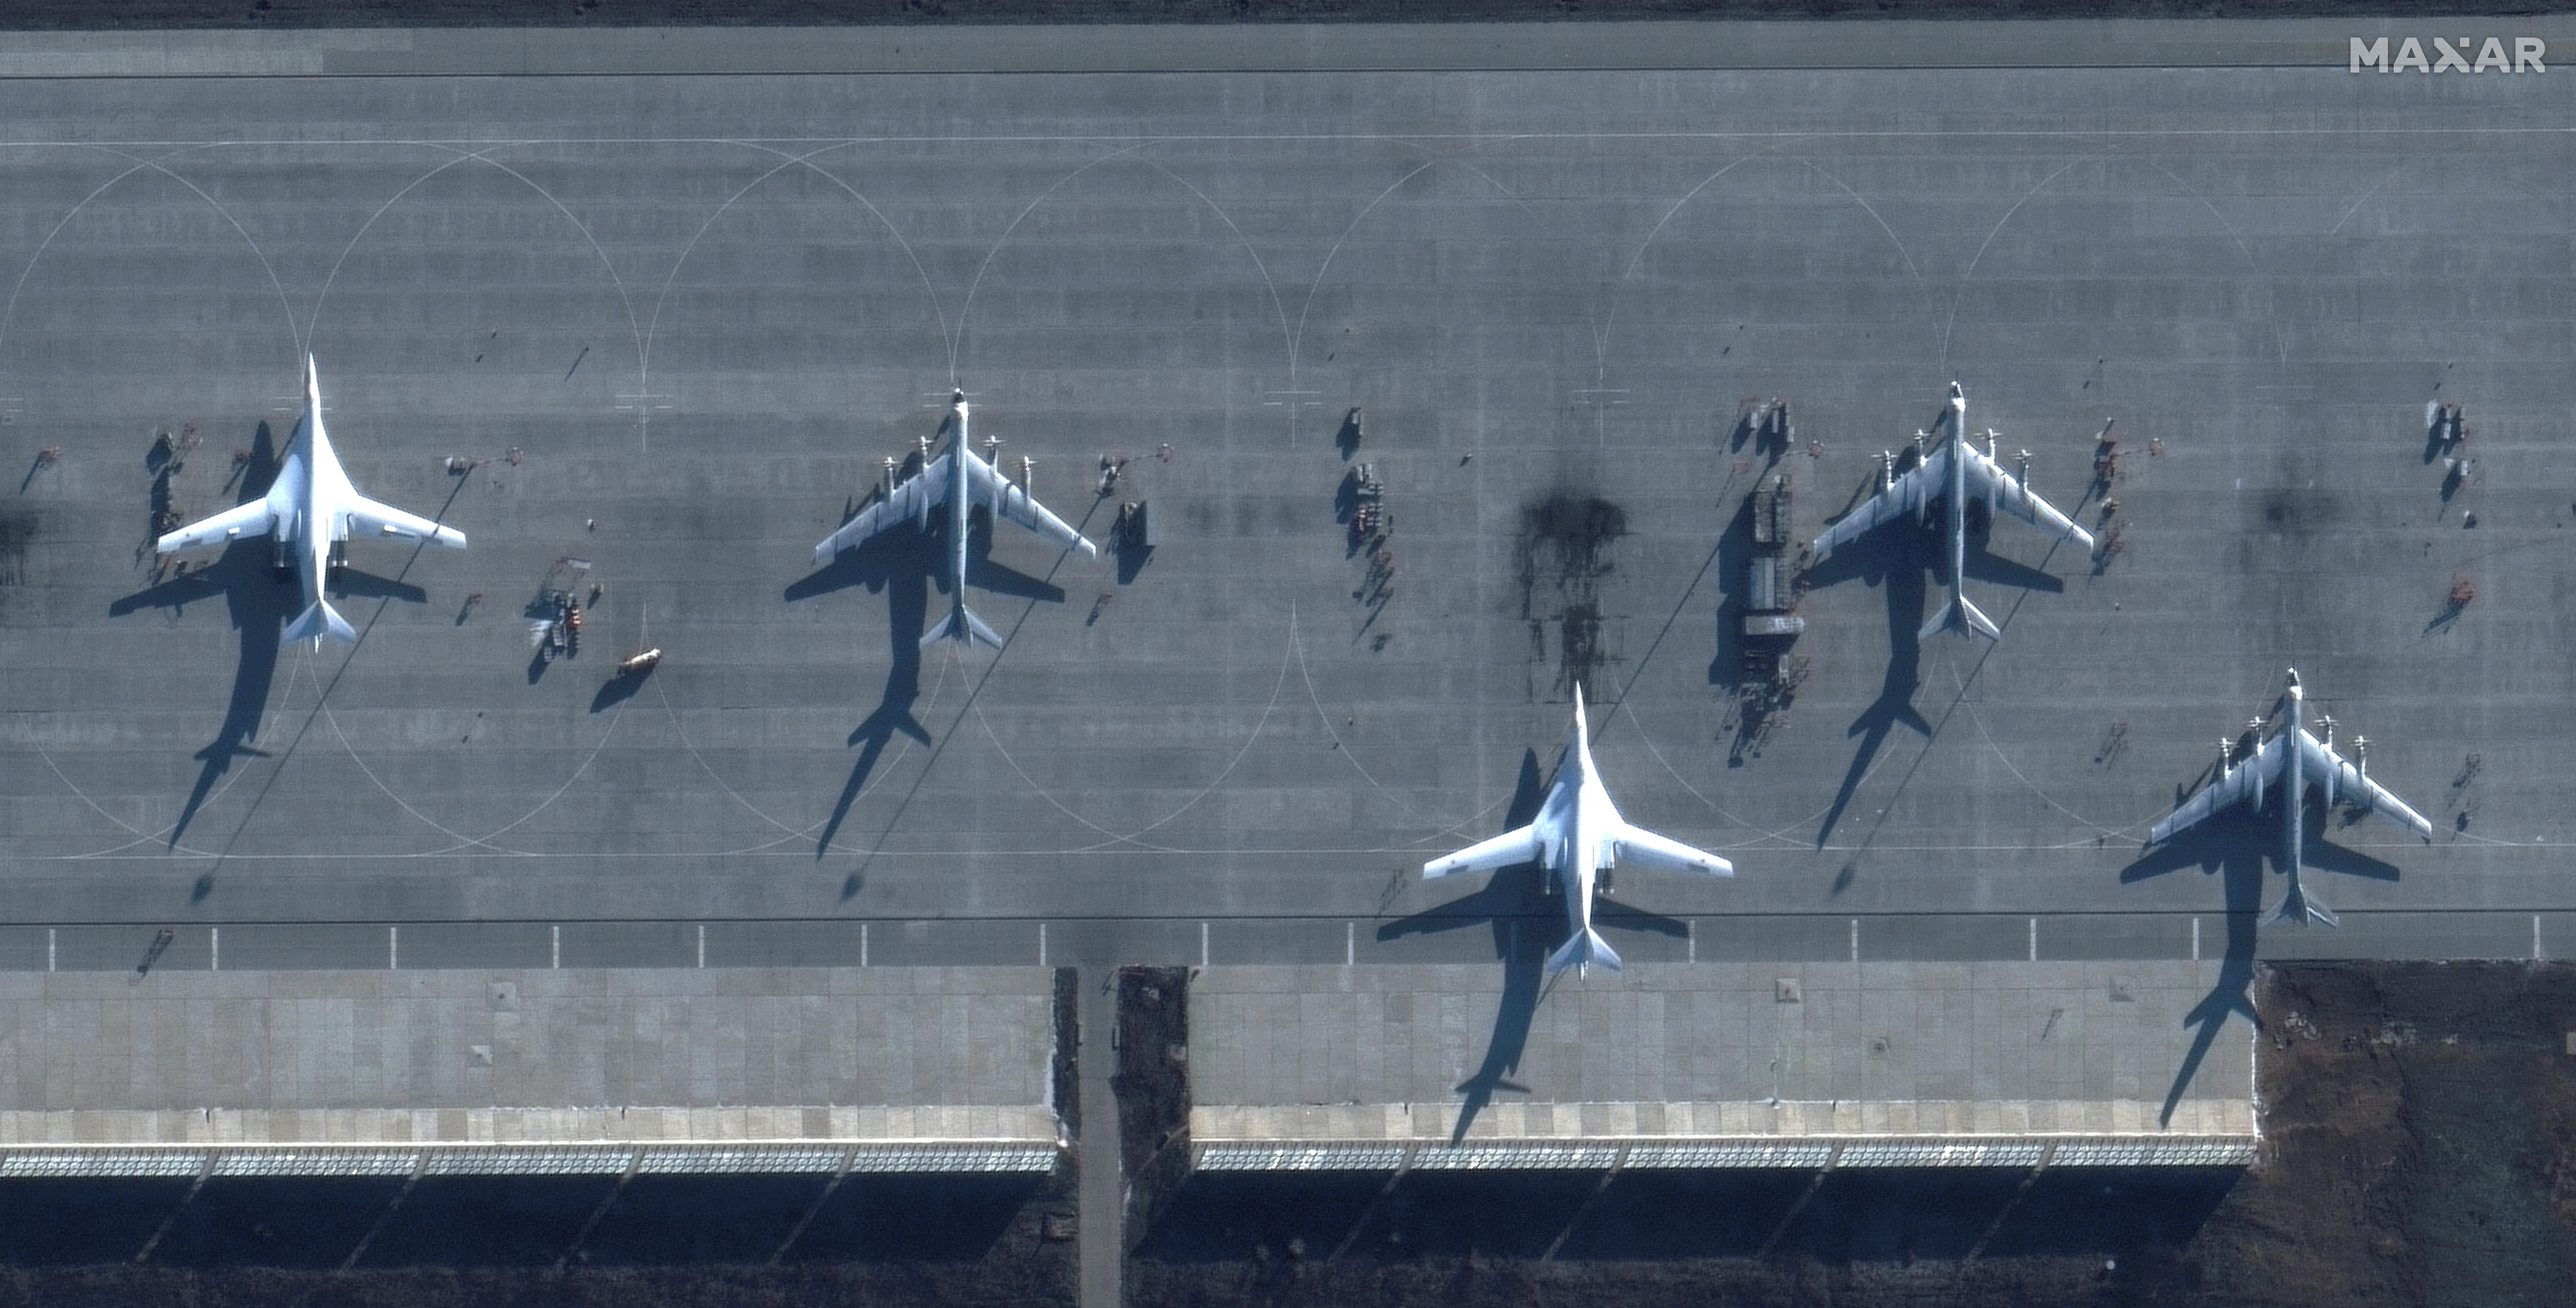 Russian bombers at Engels base on December 4 (Maxar Technologies/Handout via REUTERS)